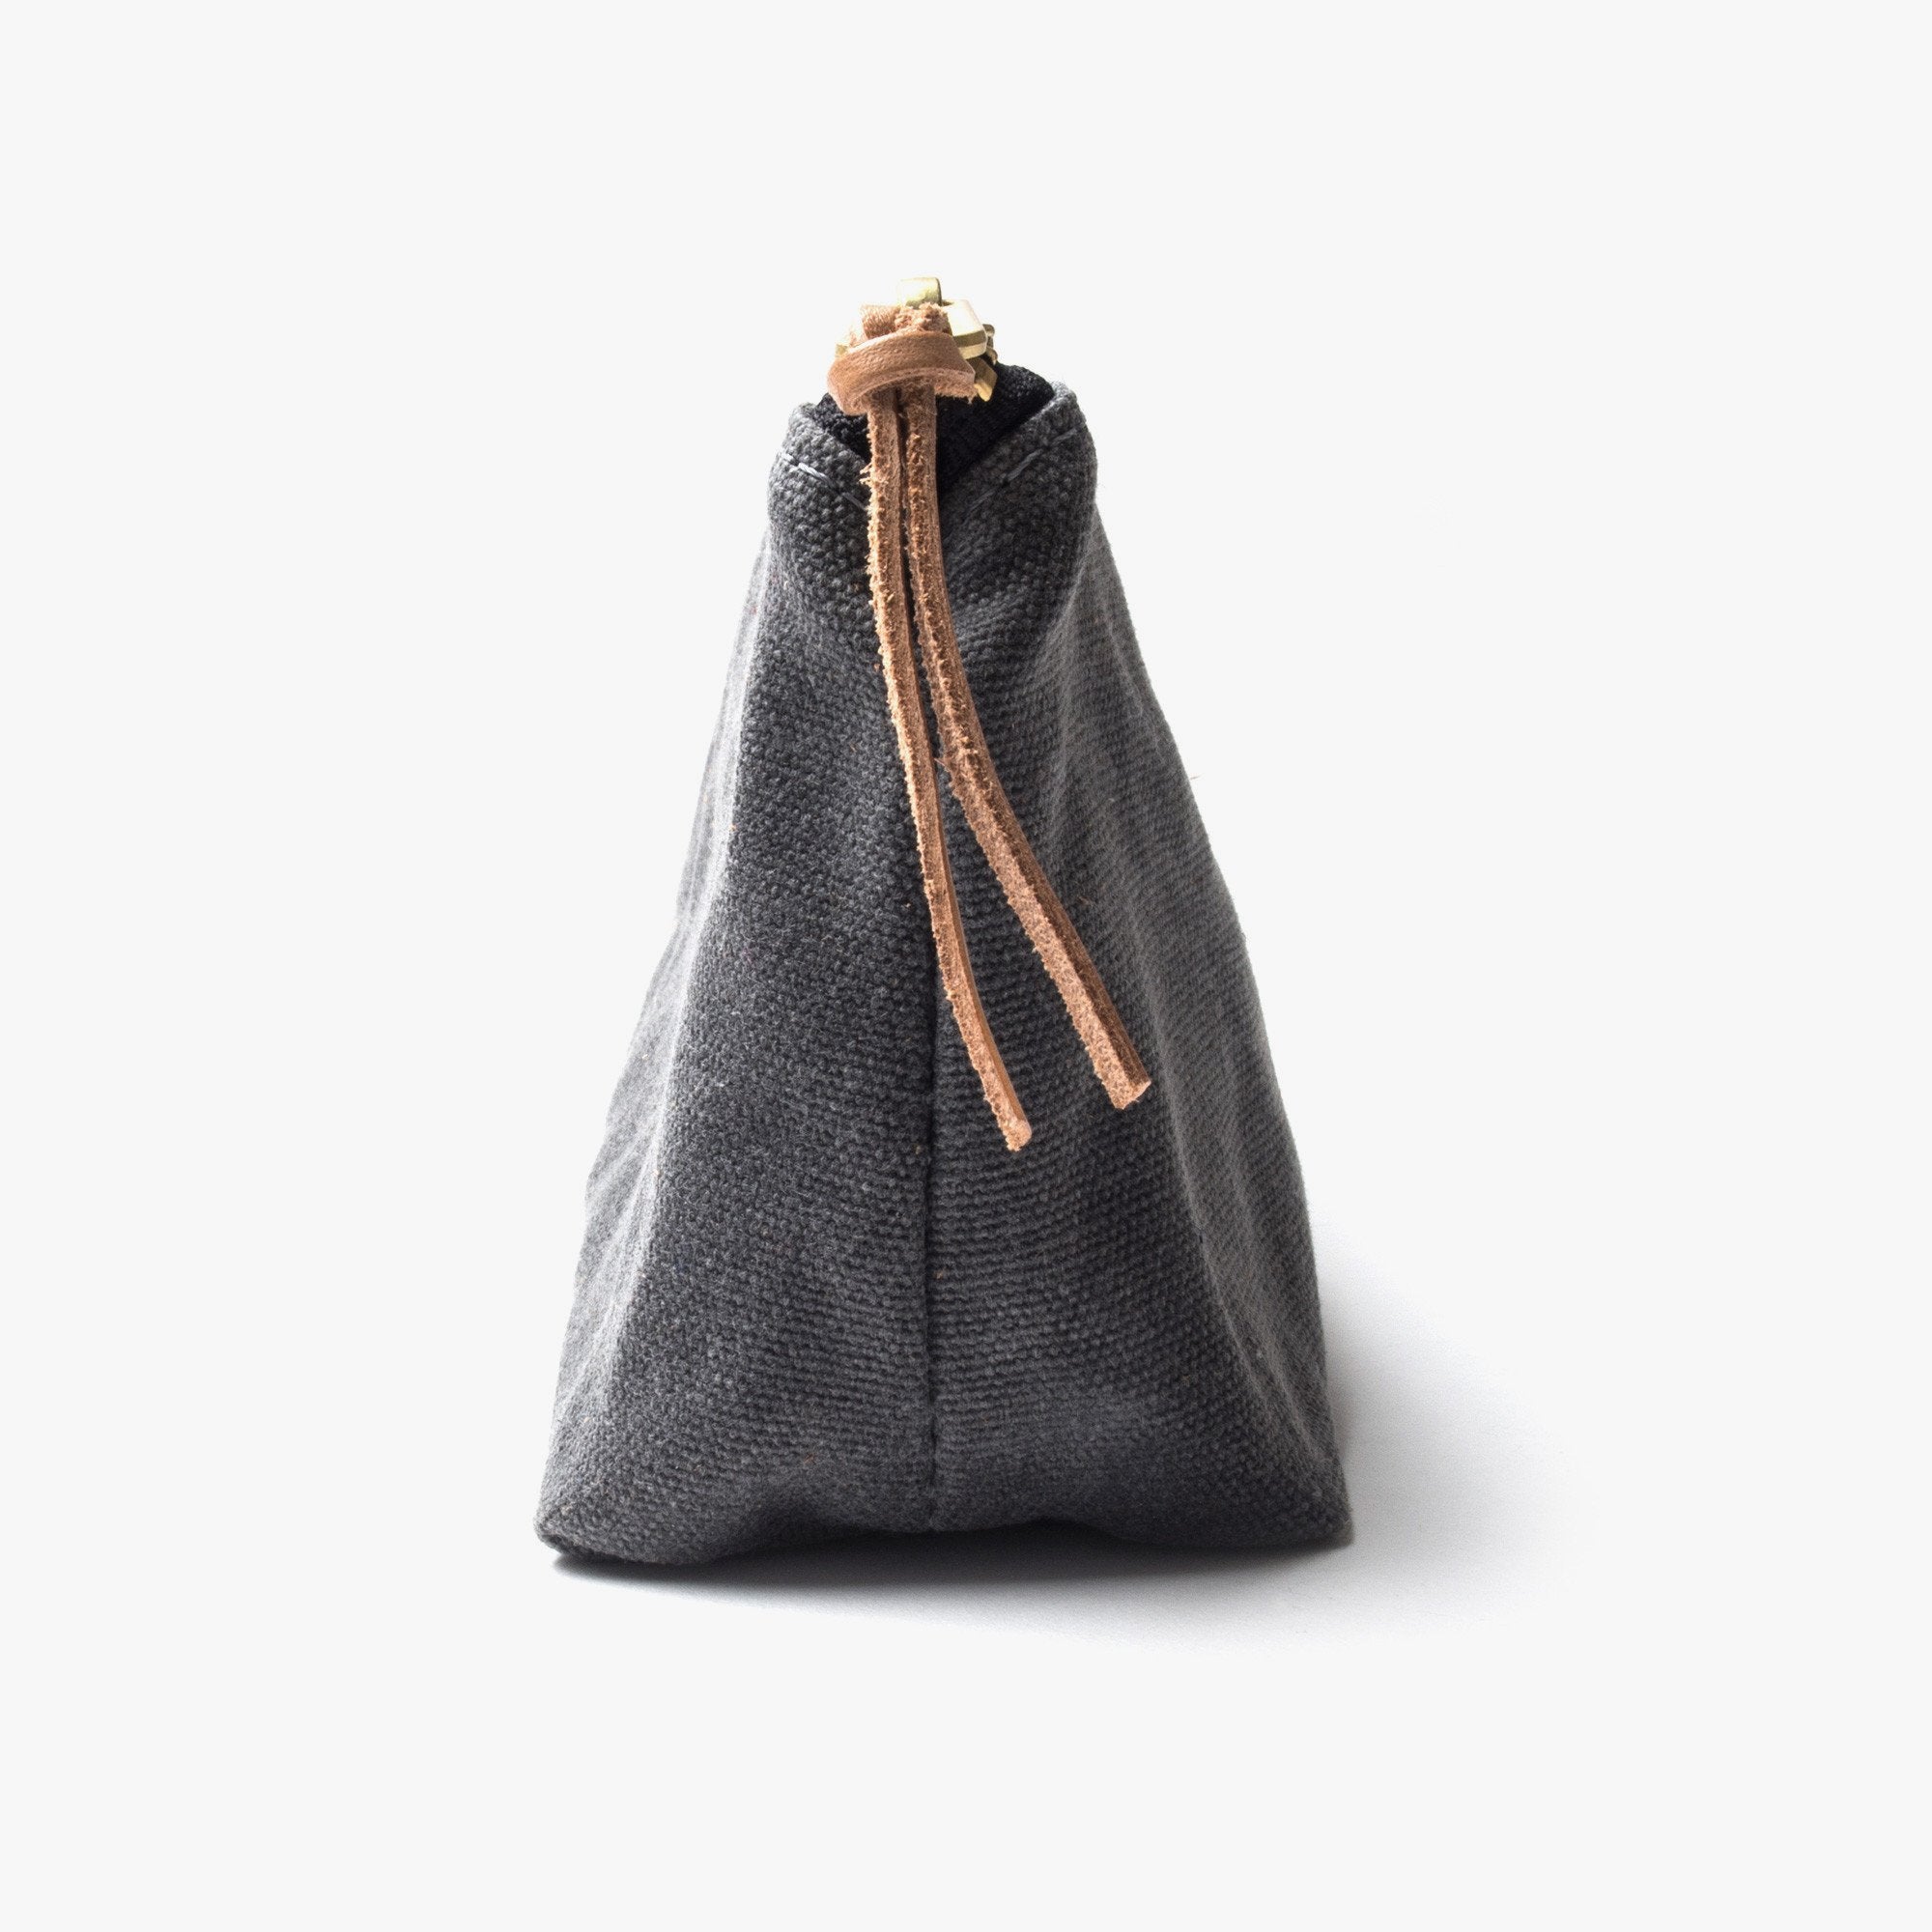 Waxed Canvas Pouch Set